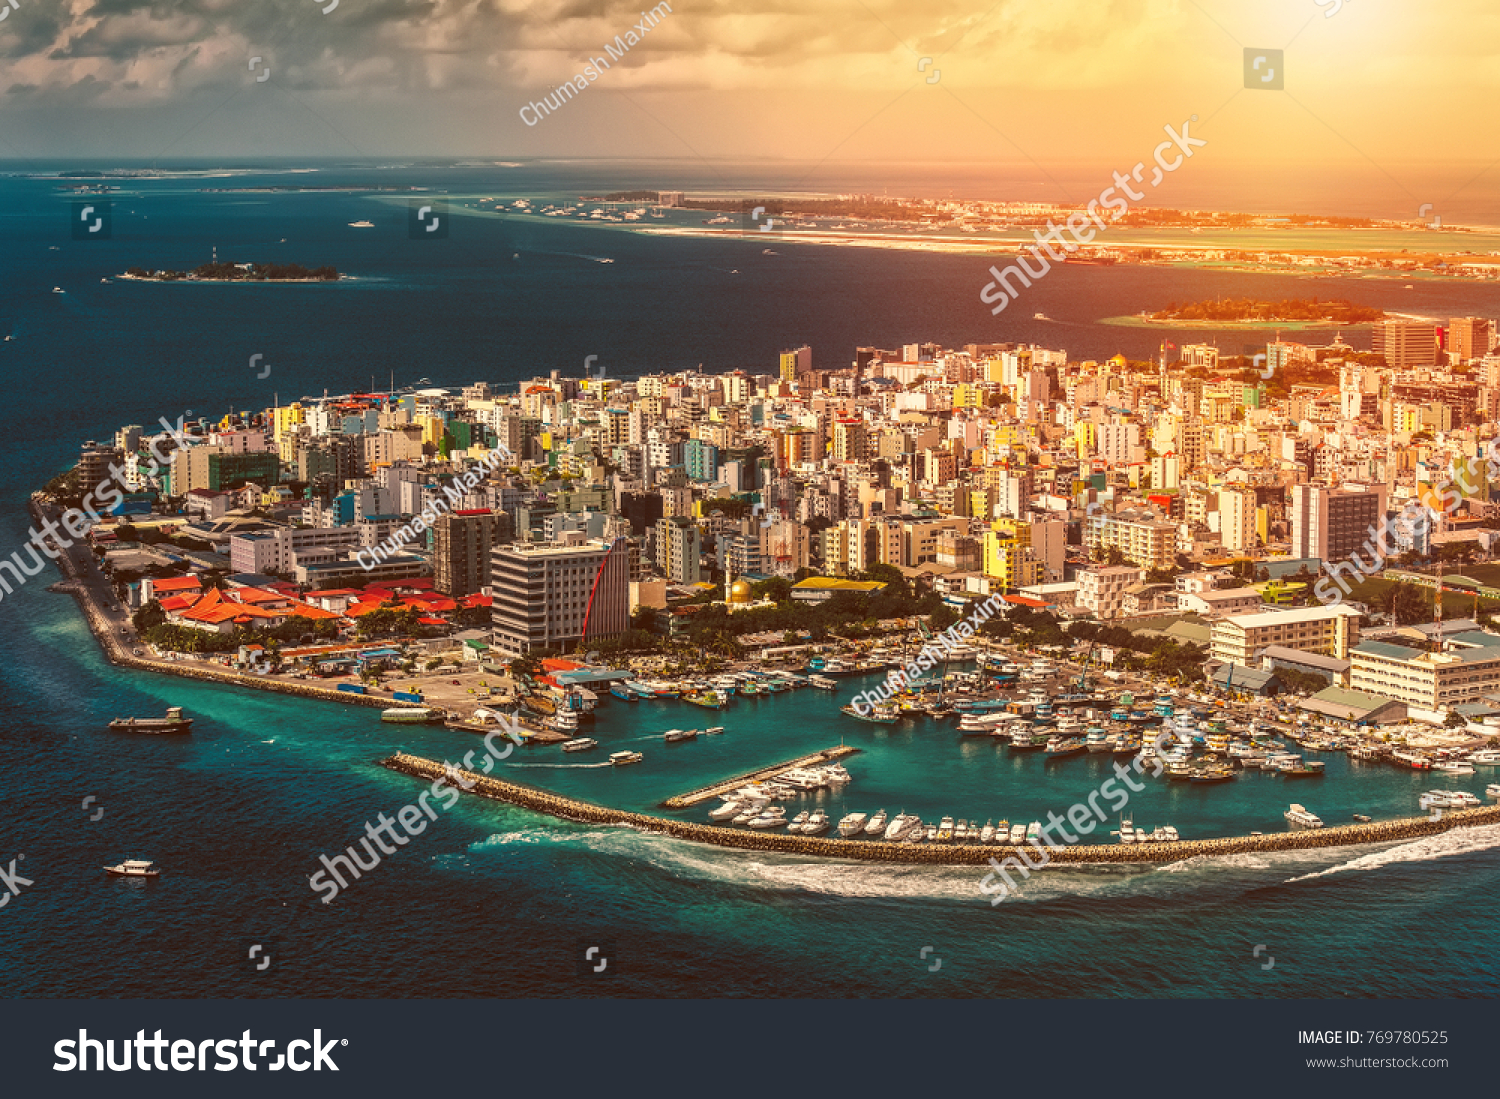 Maldivian capital from above at sunset #769780525